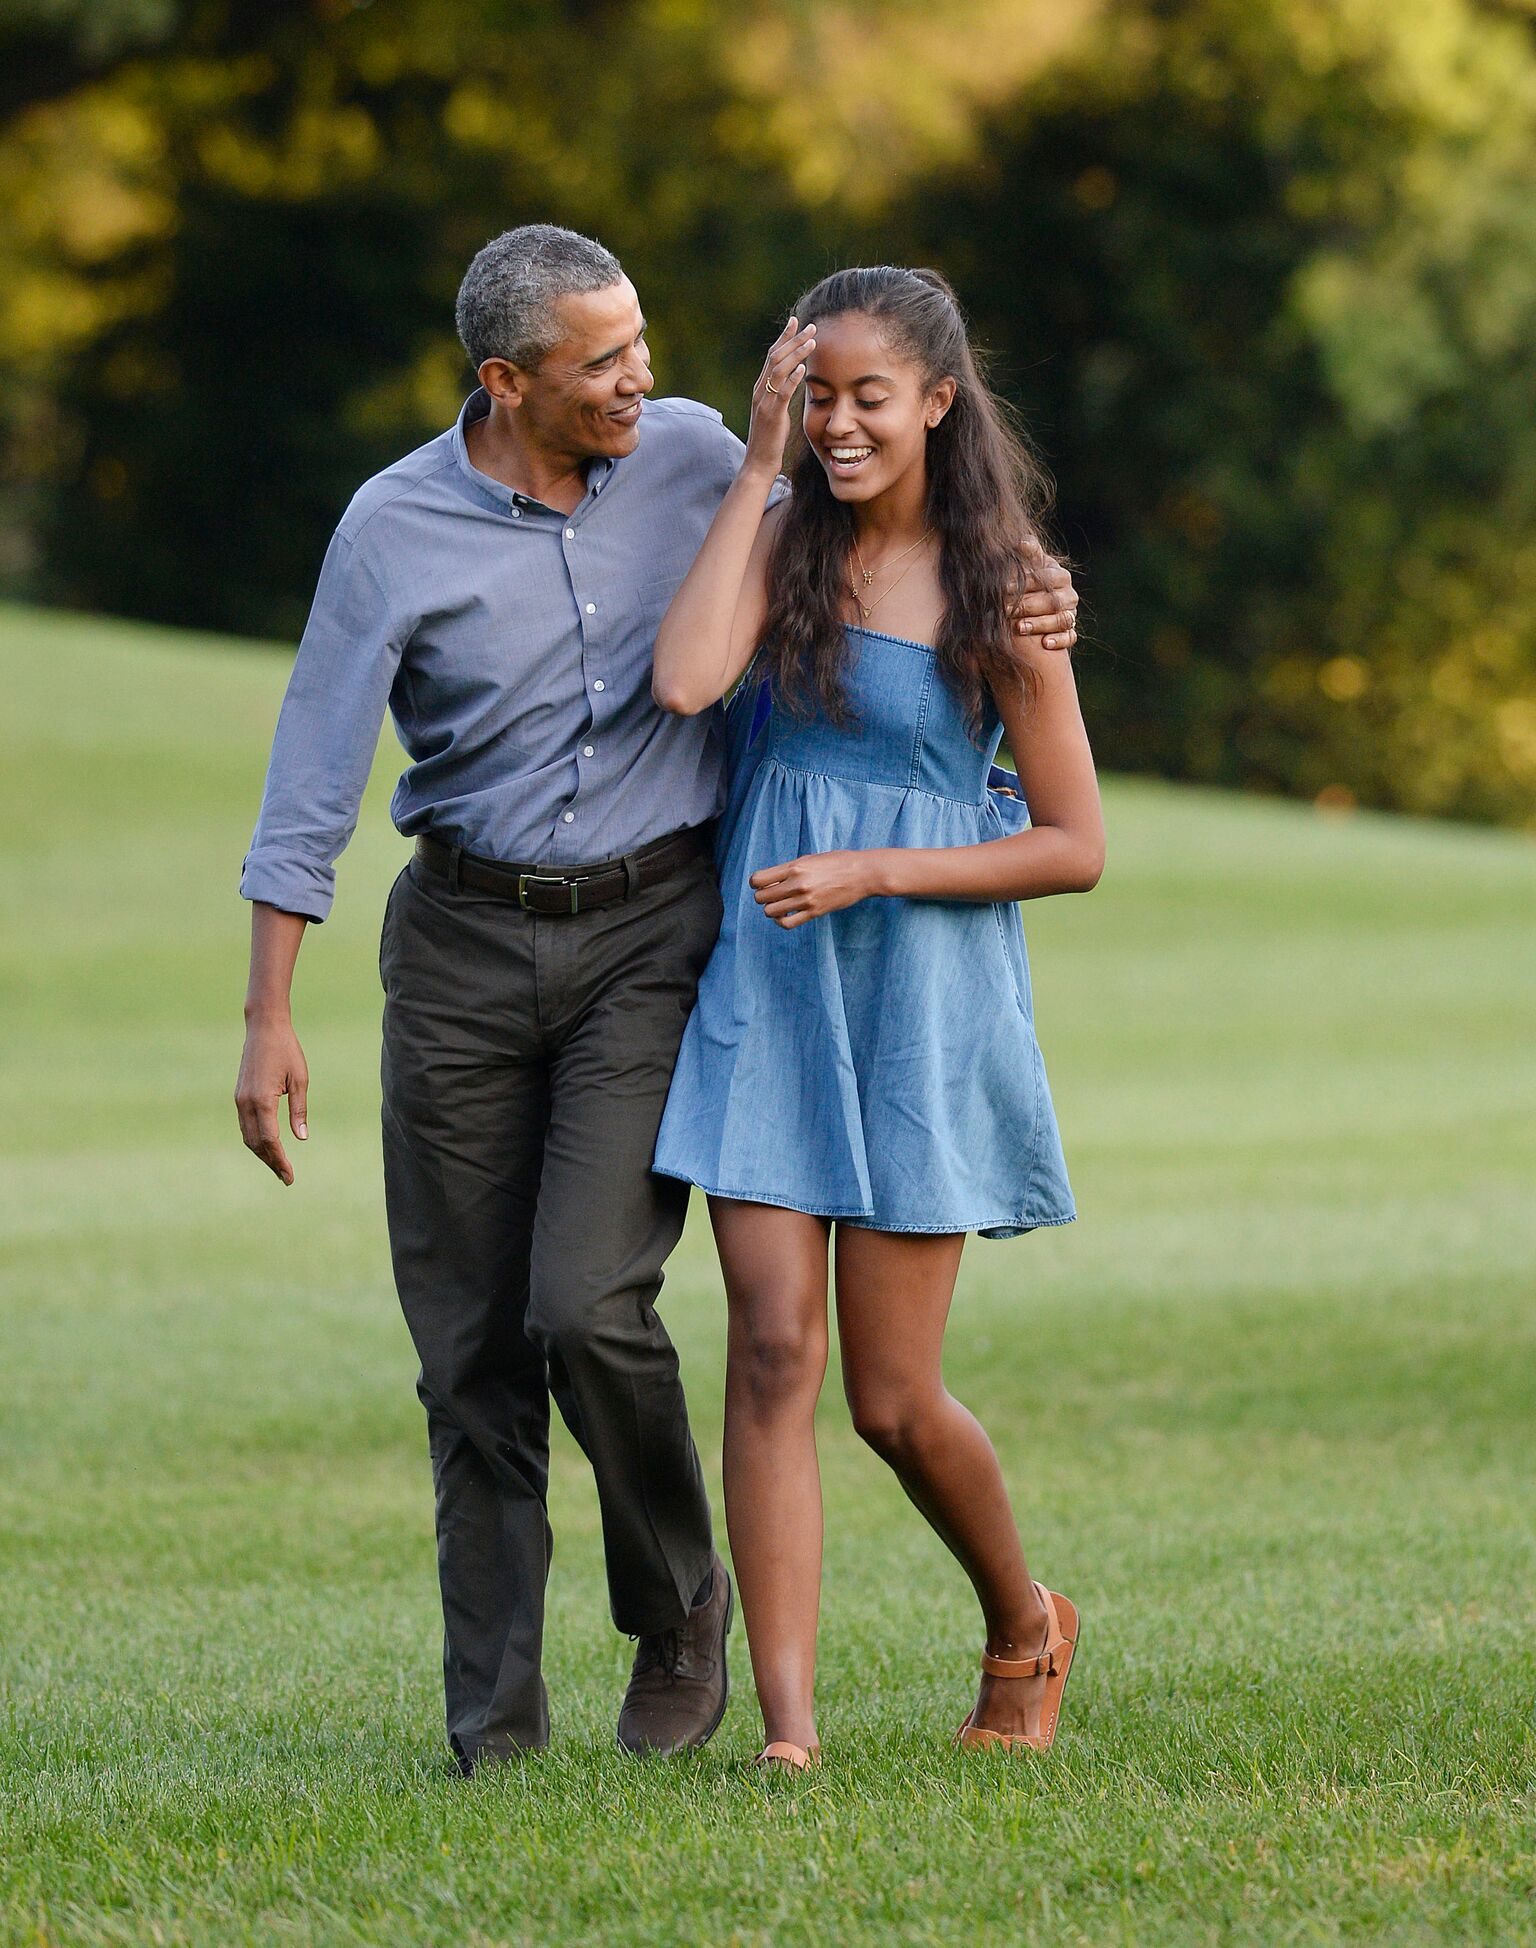 President Barack Obama and daughter Sasha arrive at the White House August 23, 2015 in Washington, D.C.  | Getty Images